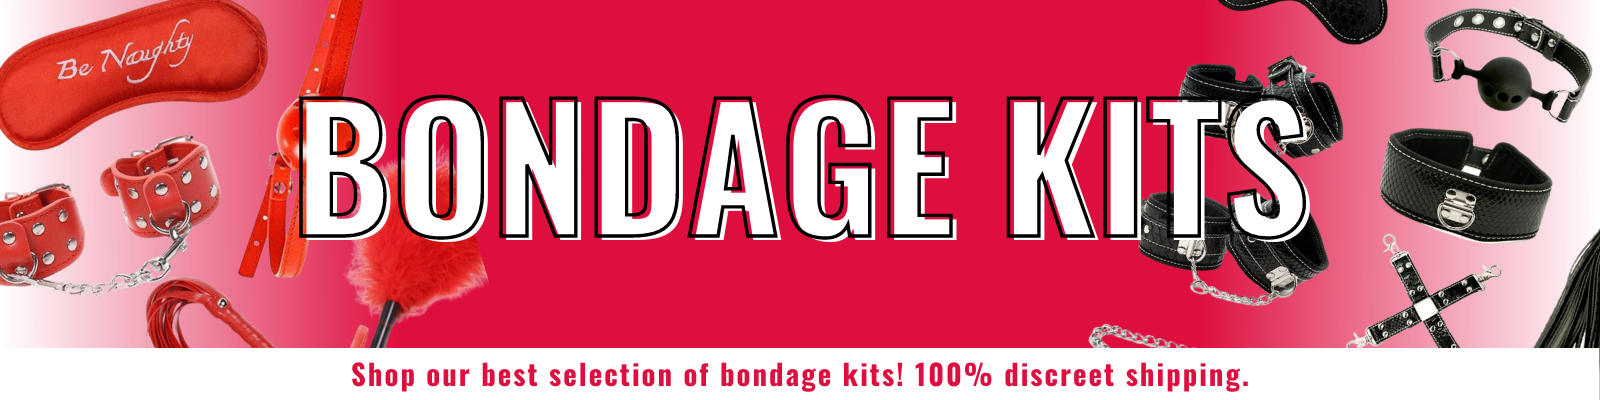 Banner for our bondage kit collection. Banner reads: Bondage kits. Shop our best selection of bondage kits! 100% discreet shipping.